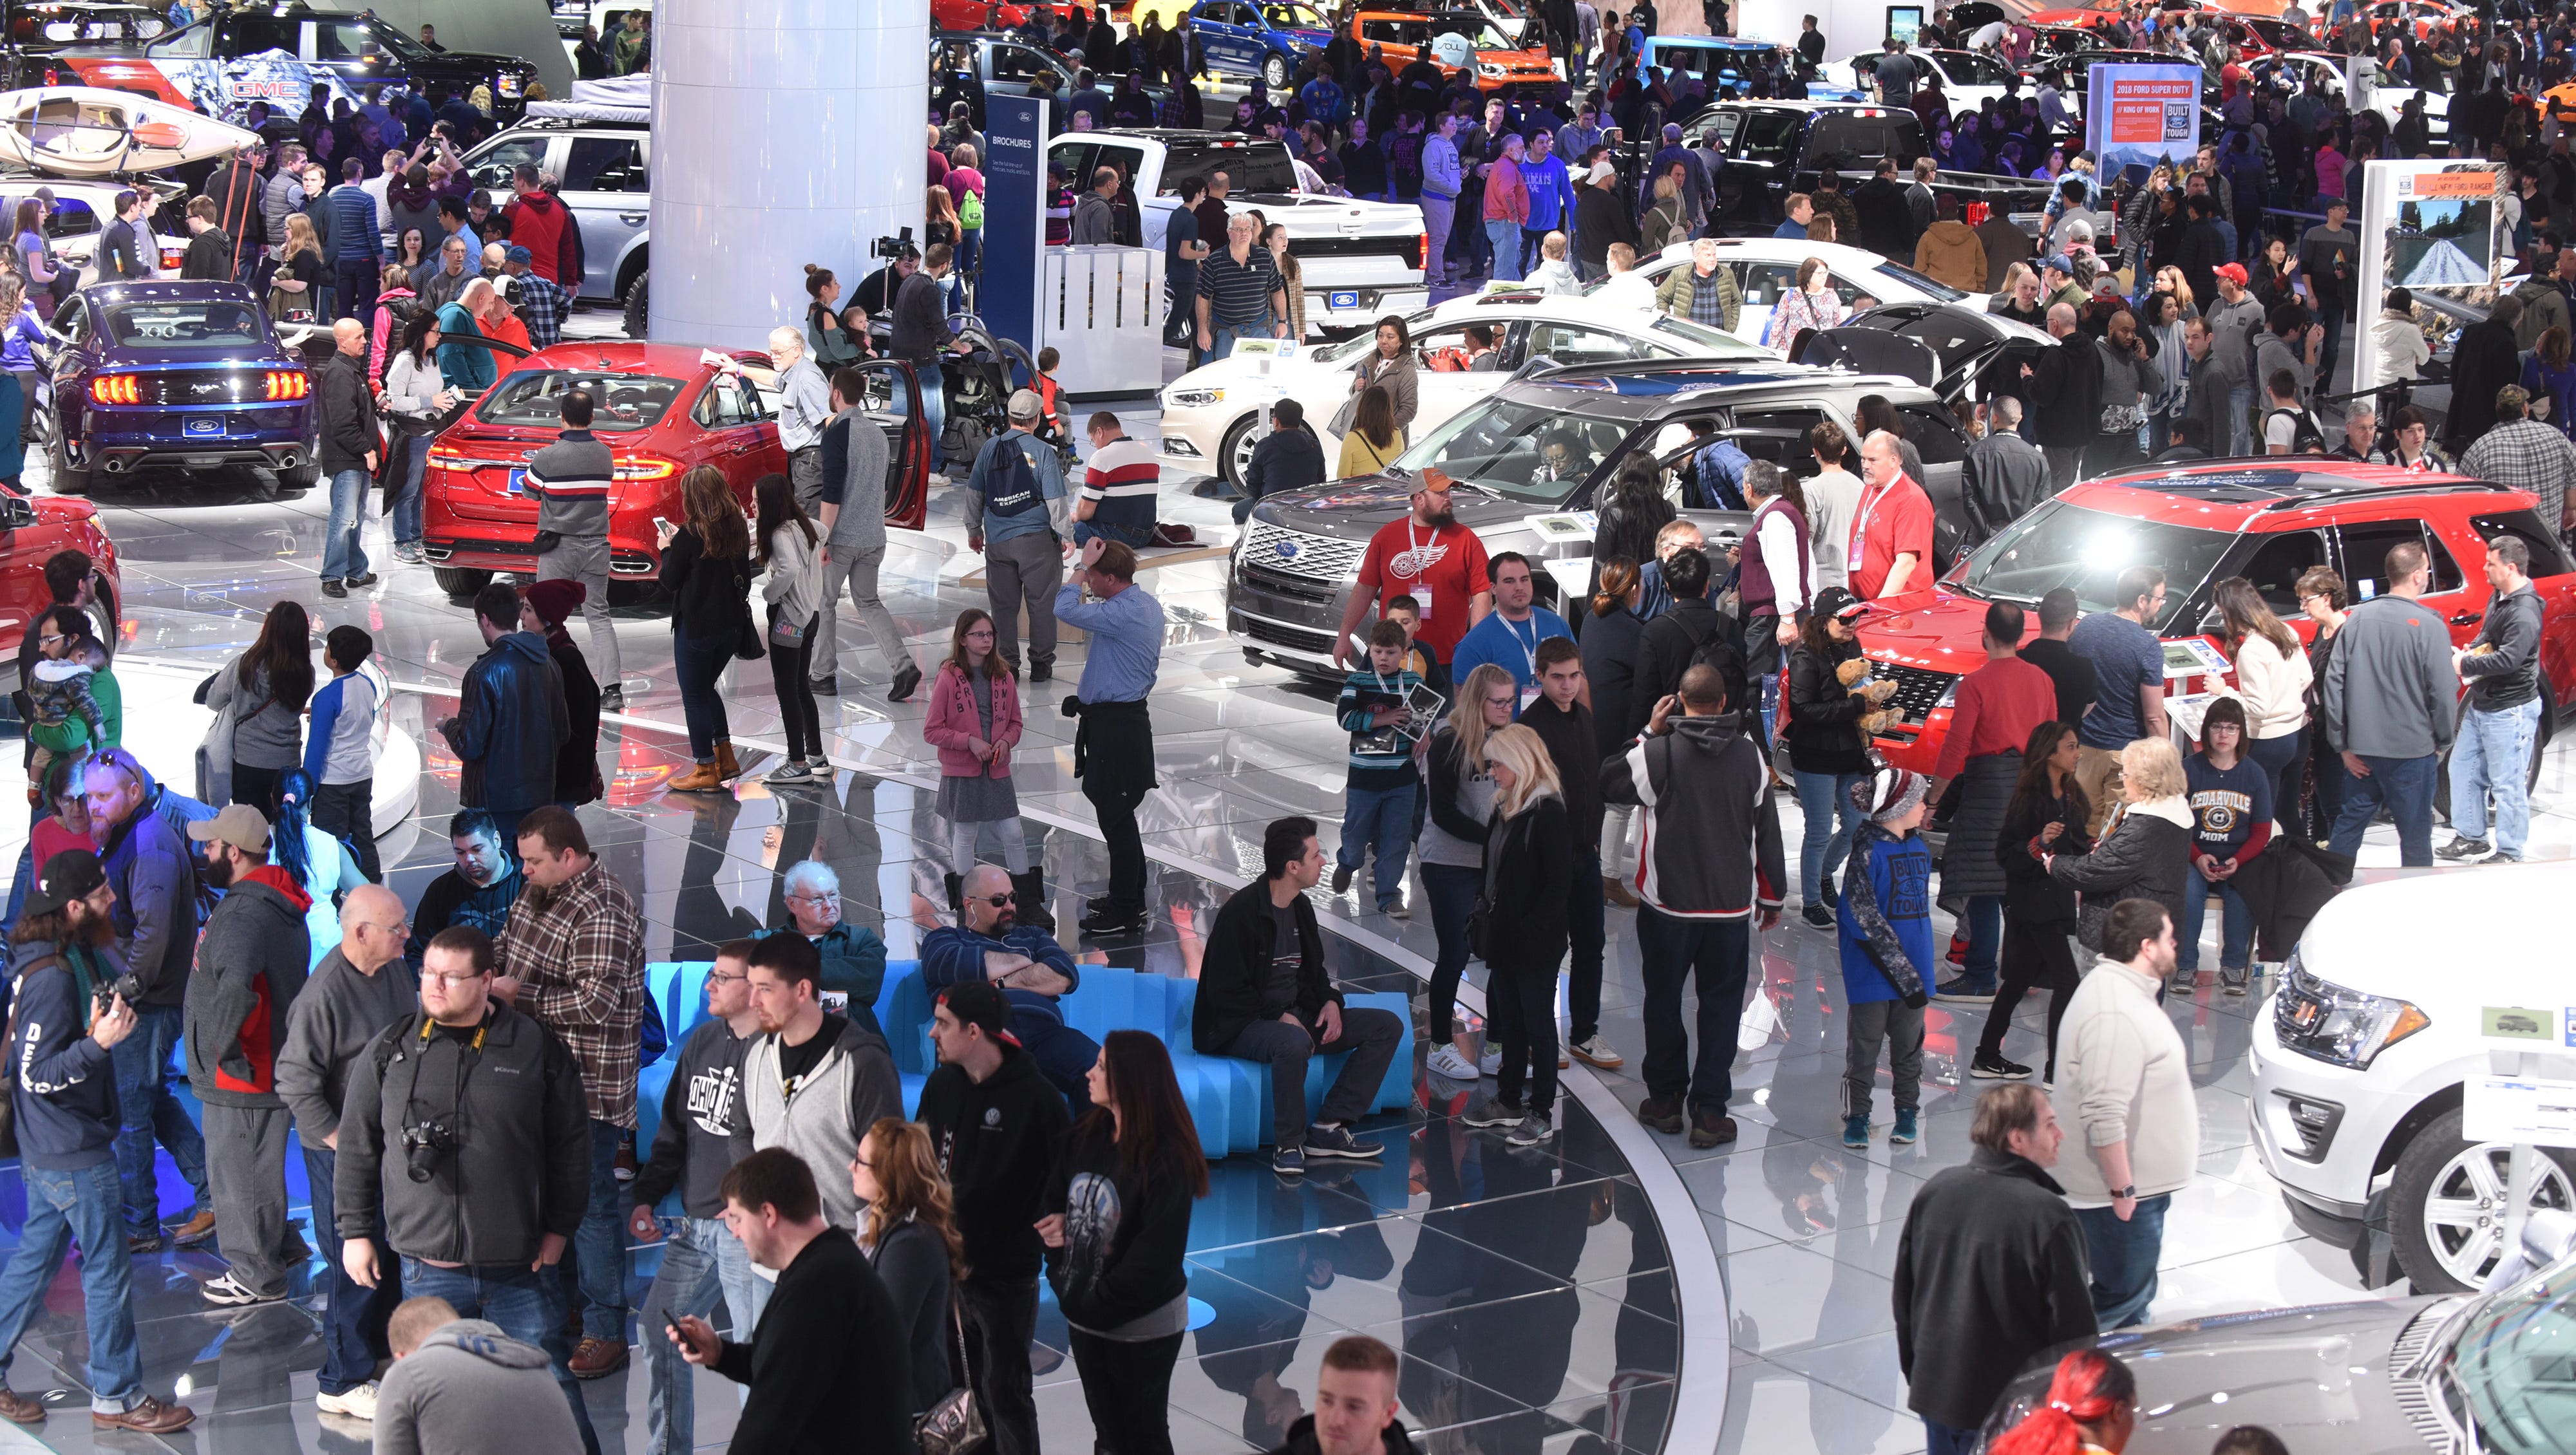 Ford Motor Company displays vehicles on Saturday January 20, 2018 for the first public at the North American International Auto Show.